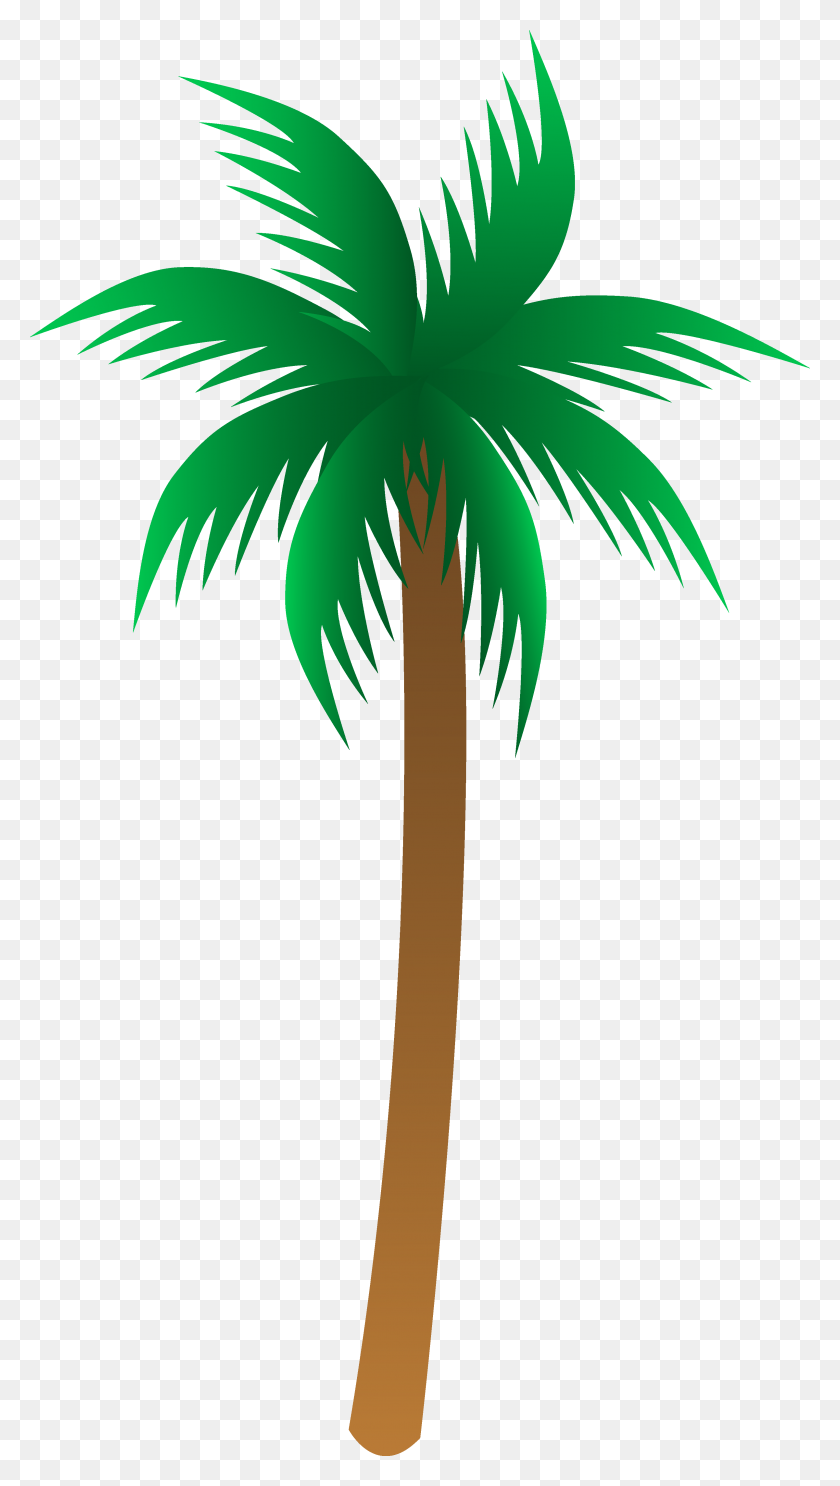 3182x5819 Palm Tree Clipart Tropical Palm Tree Vector - Tree Clipart PNG